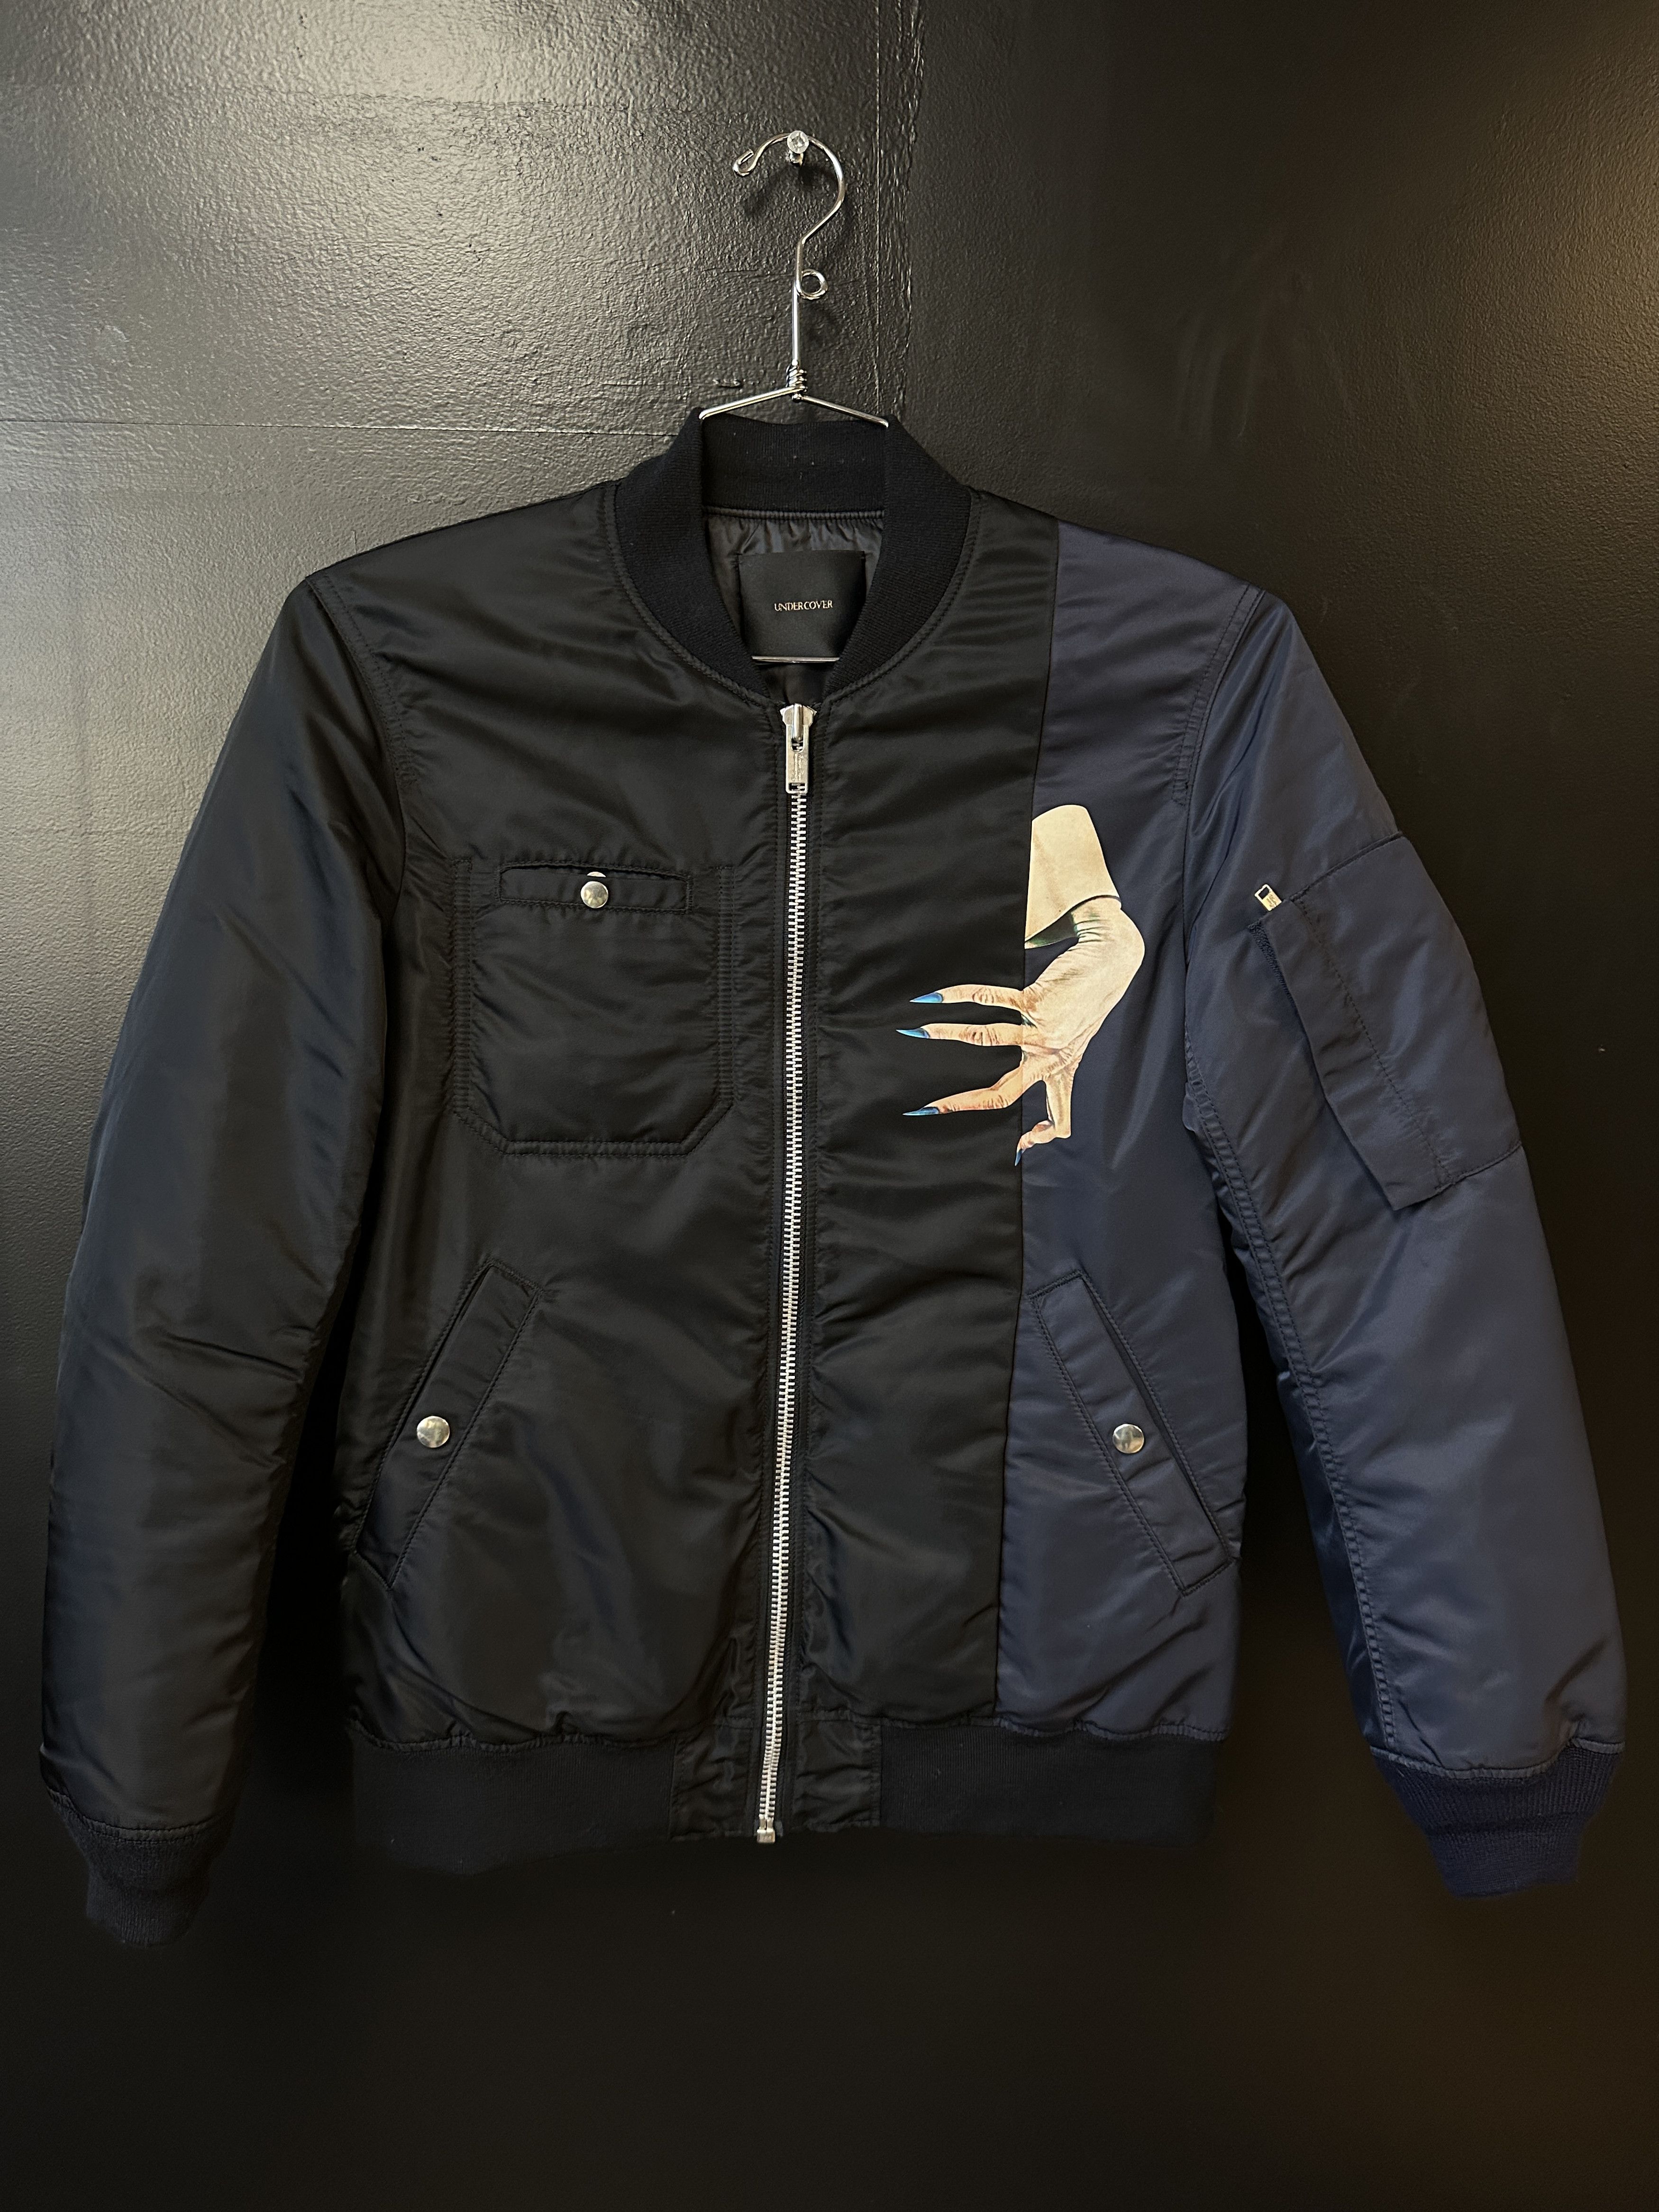 Undercover Undercover Navy D-Hand MA-1 Bomber Jacket | Grailed